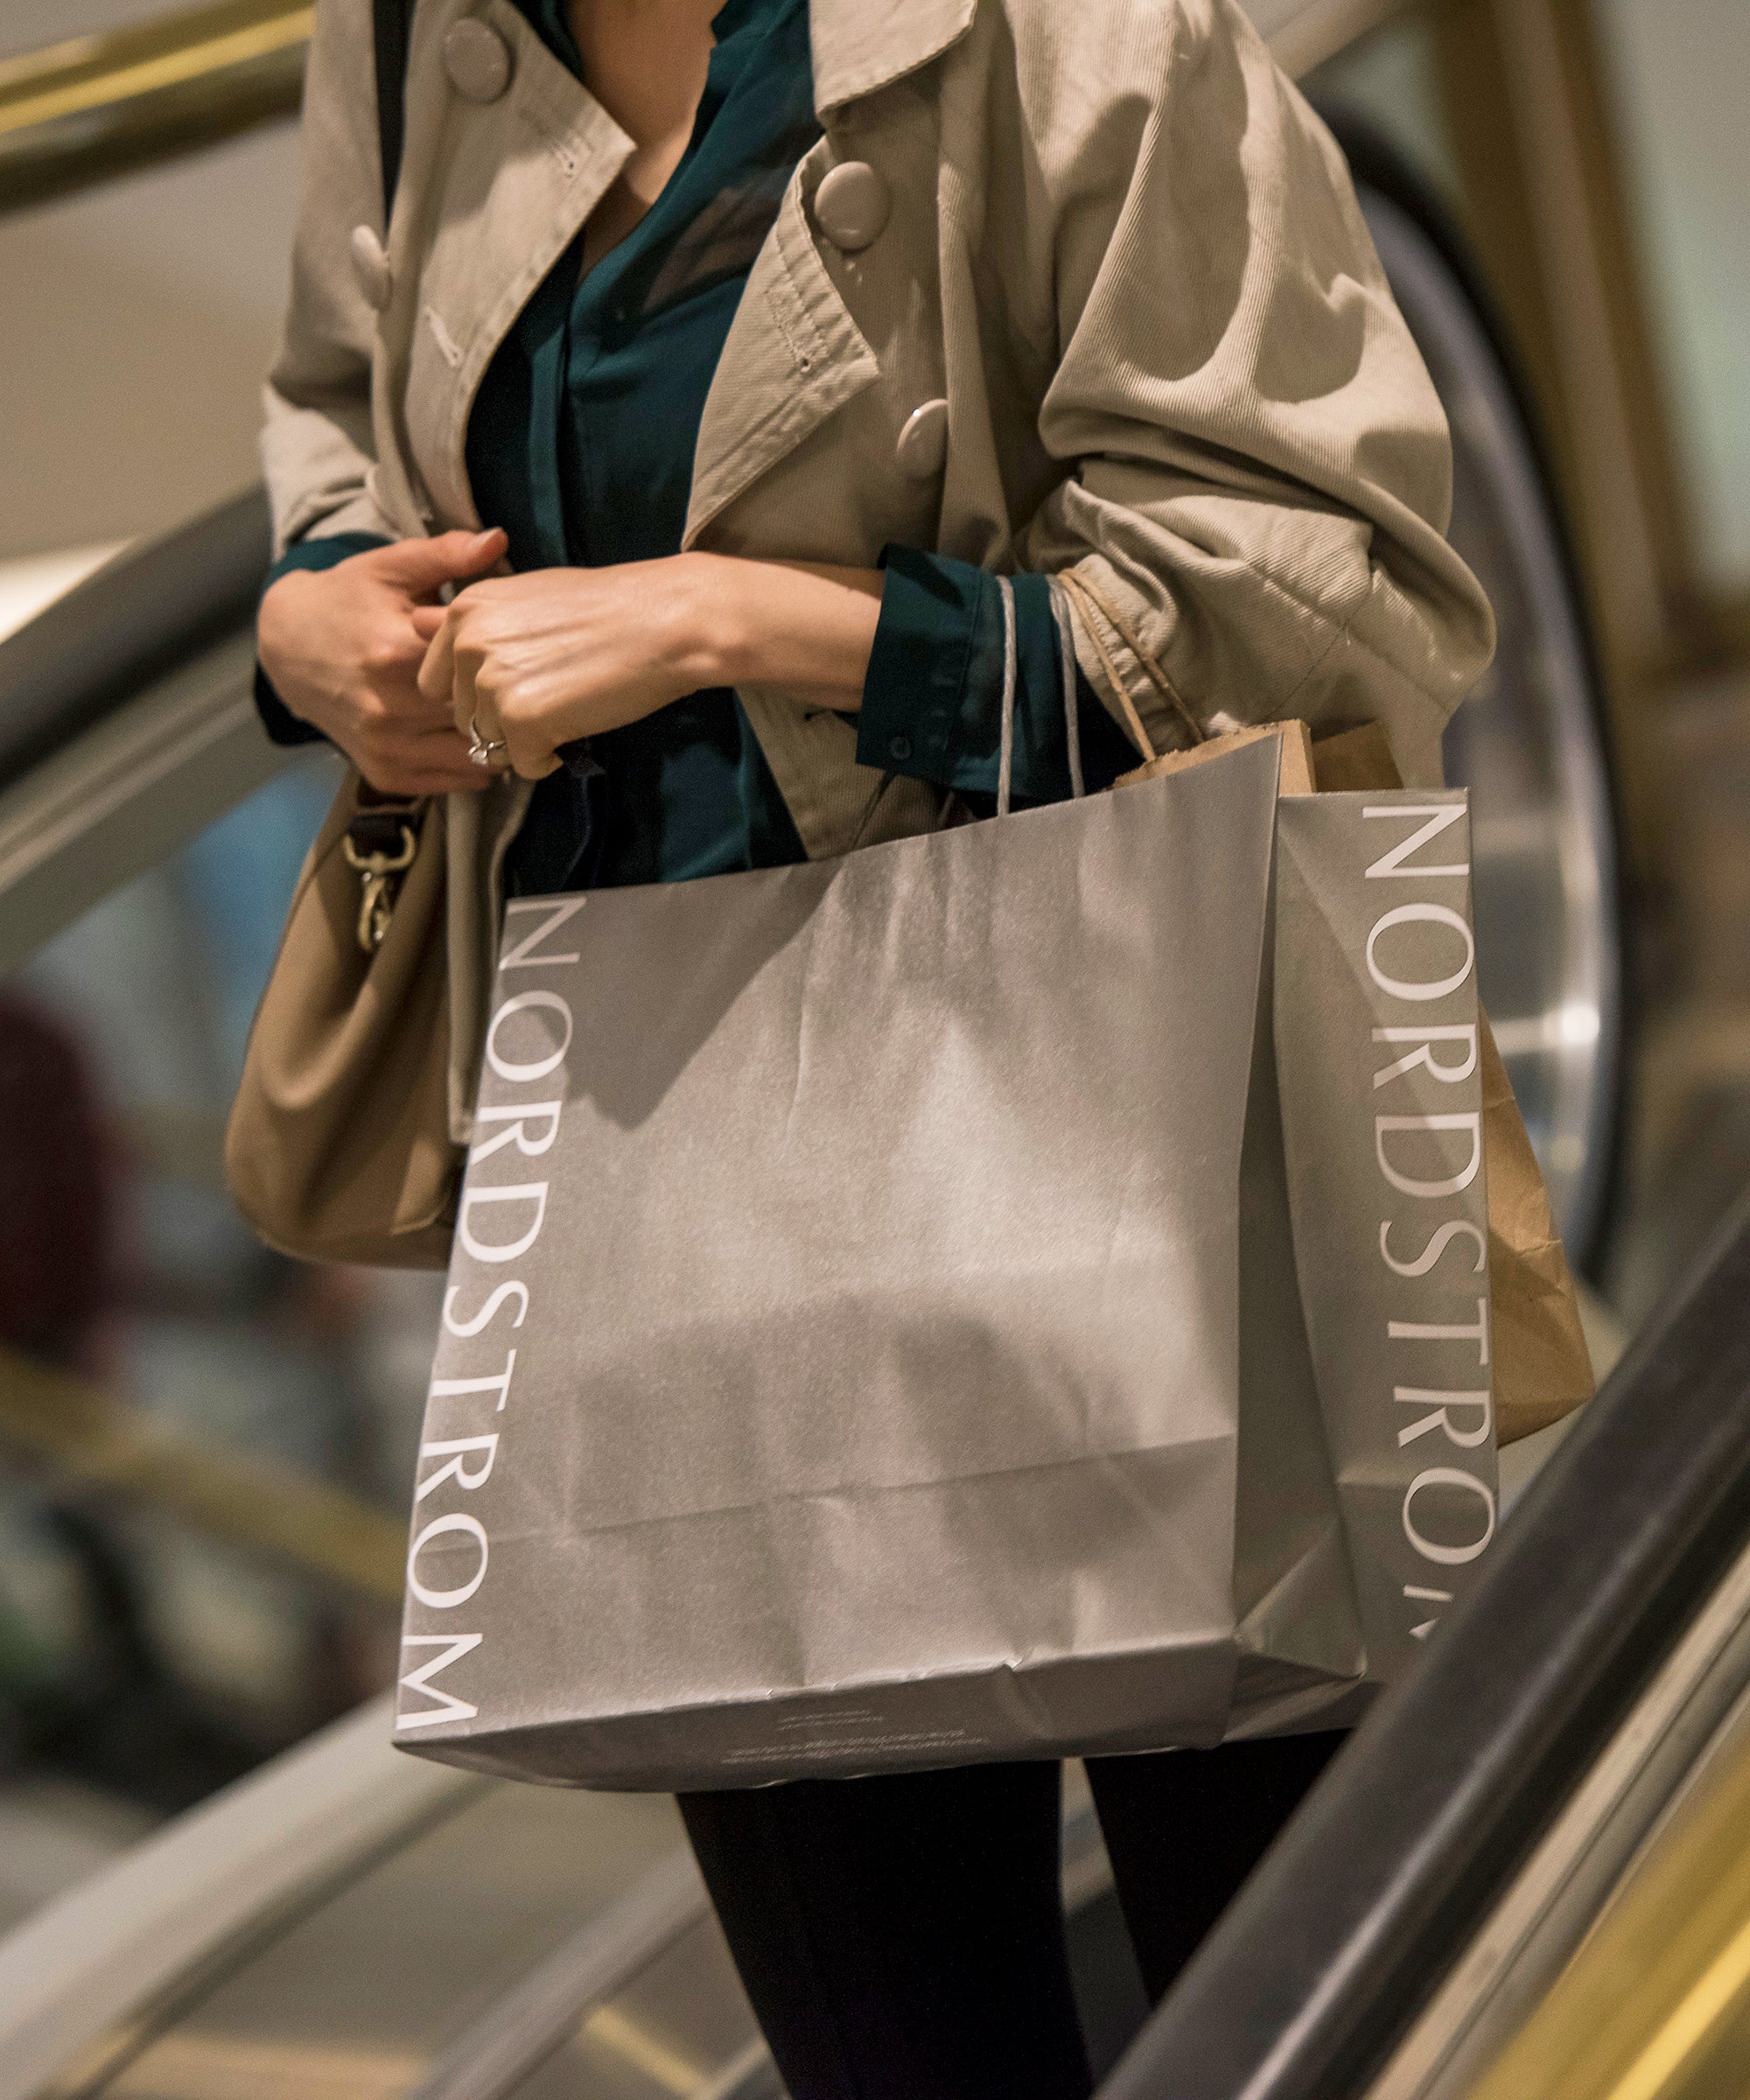 Look back at Nordstrom's history as the retailer opens a 320,000